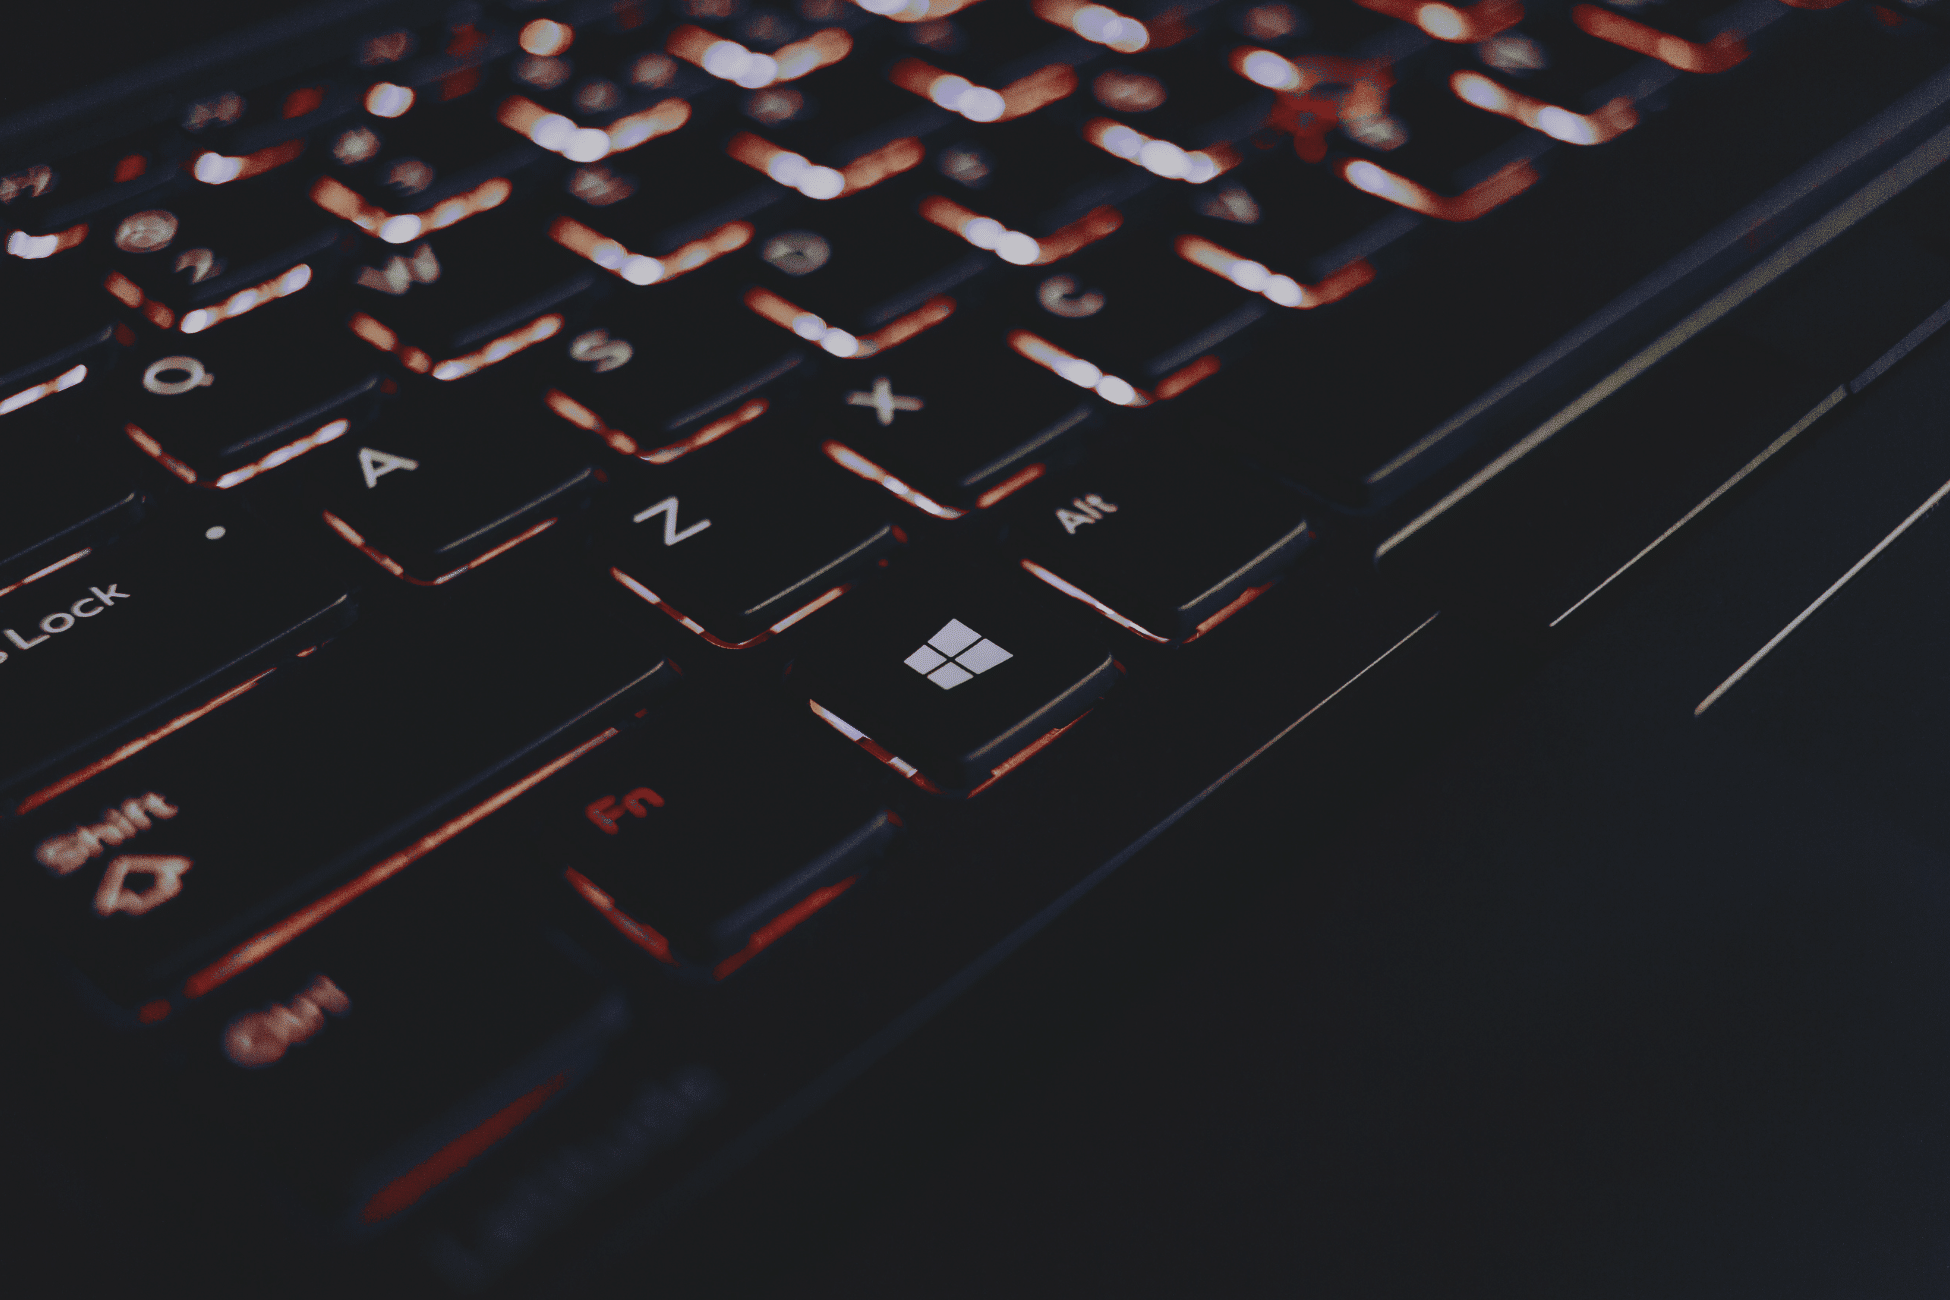 A black window's keyboard with orange backlighting. » admin by request » admin by request